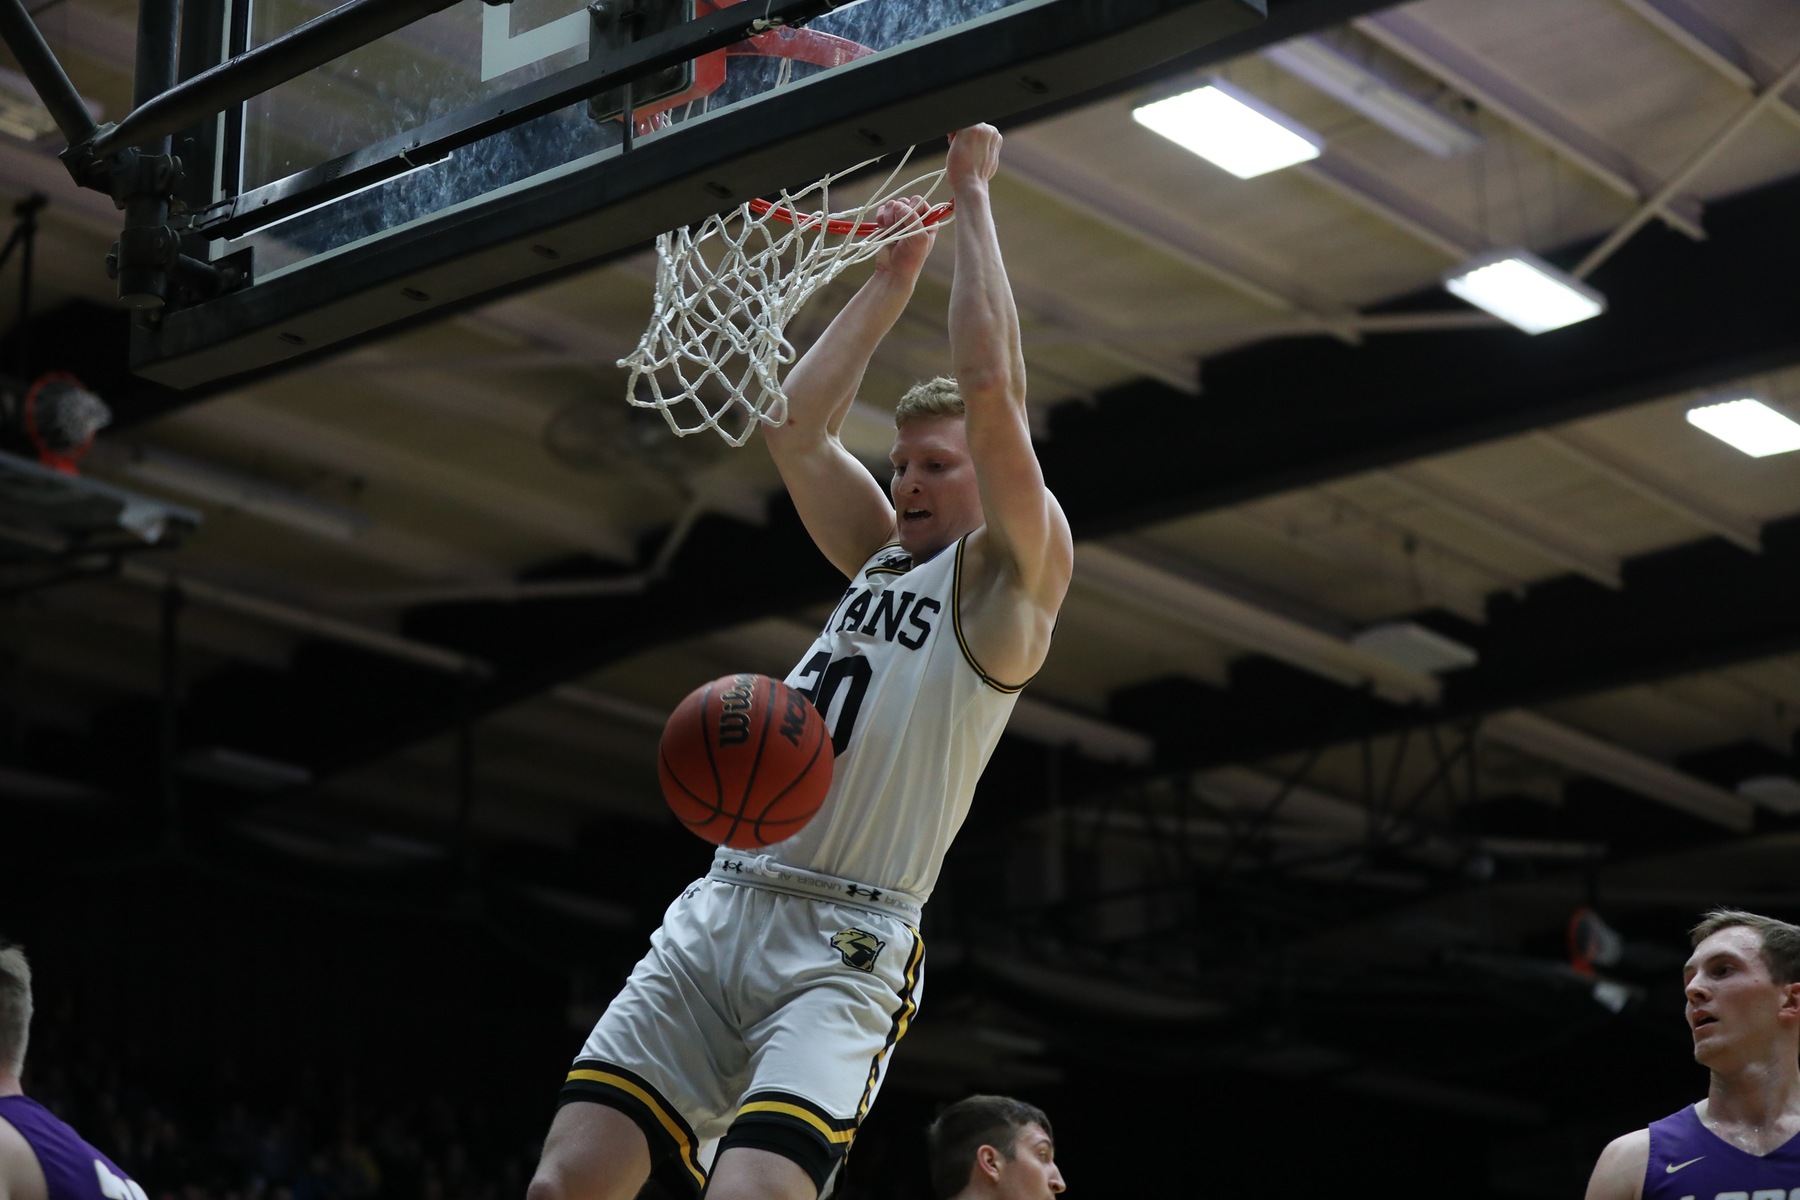 Connor Duax scored a career-high 26 points against the Duhawks, including this first-half dunk.